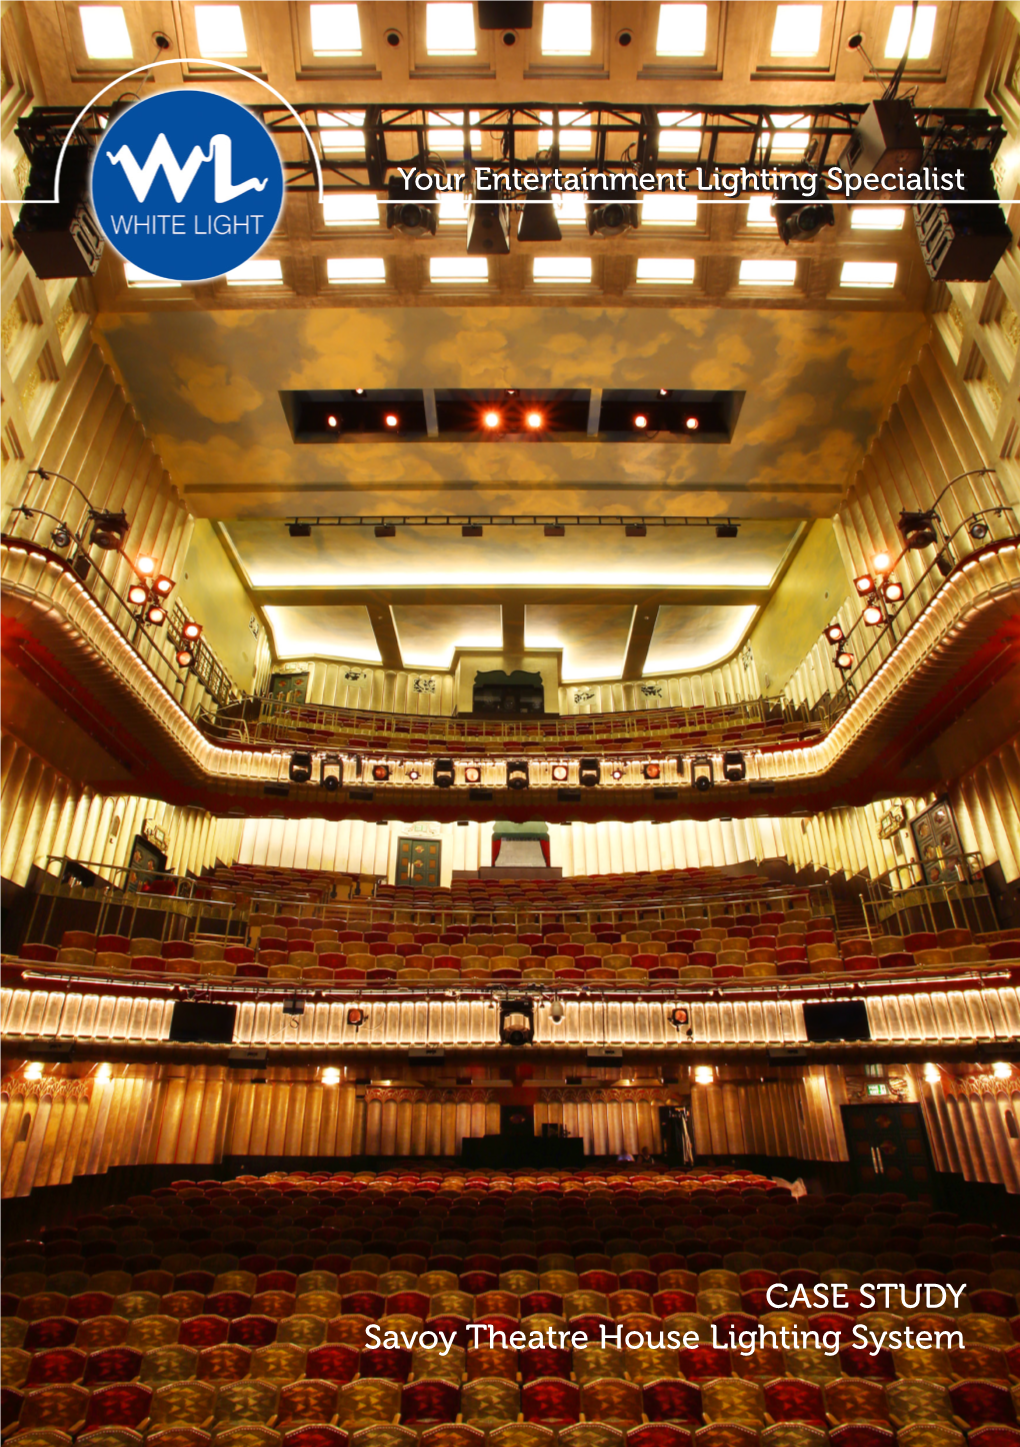 CASE STUDY Savoy Theatre House Lighting System Leading the Way with LED Technology